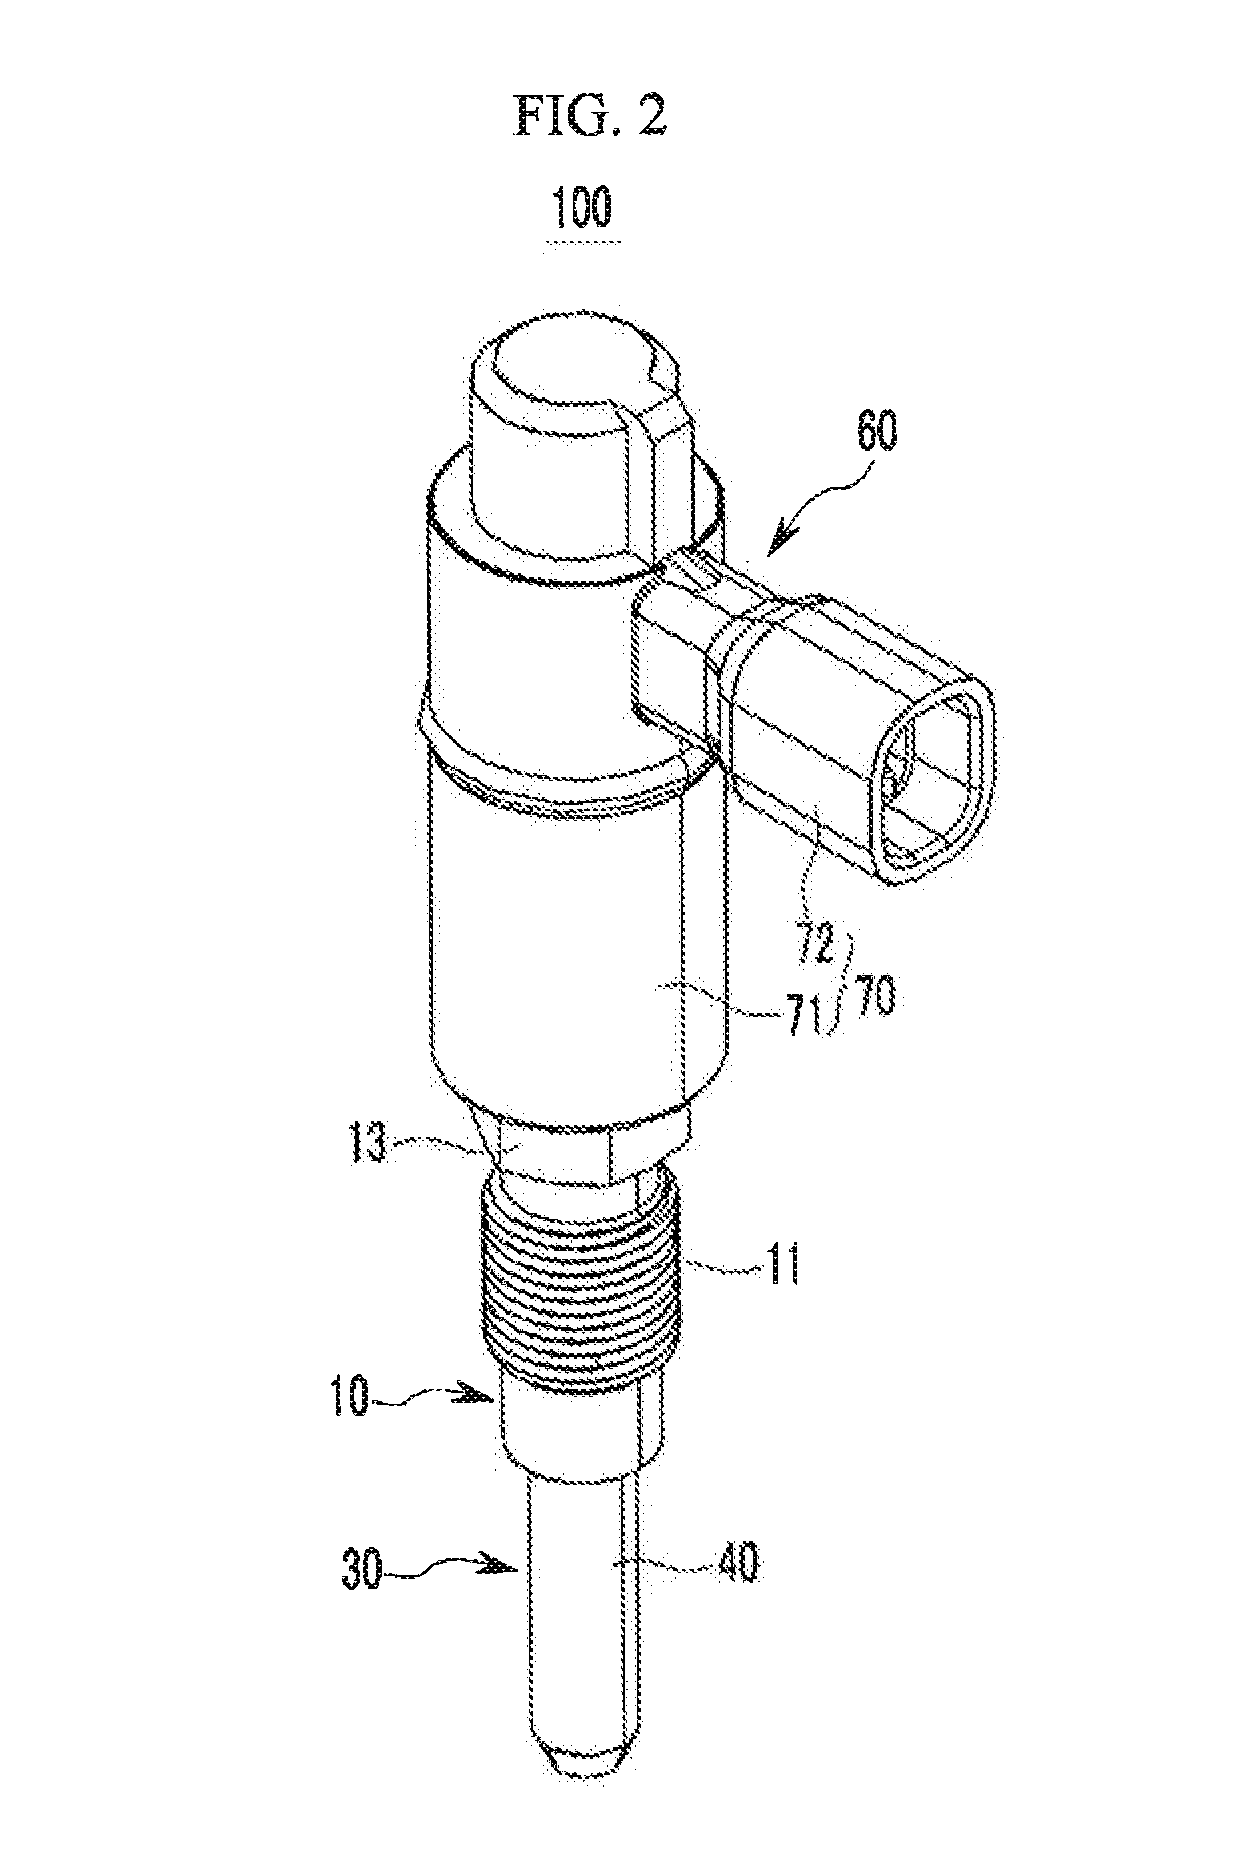 Glow plug and electric thermostat with the same